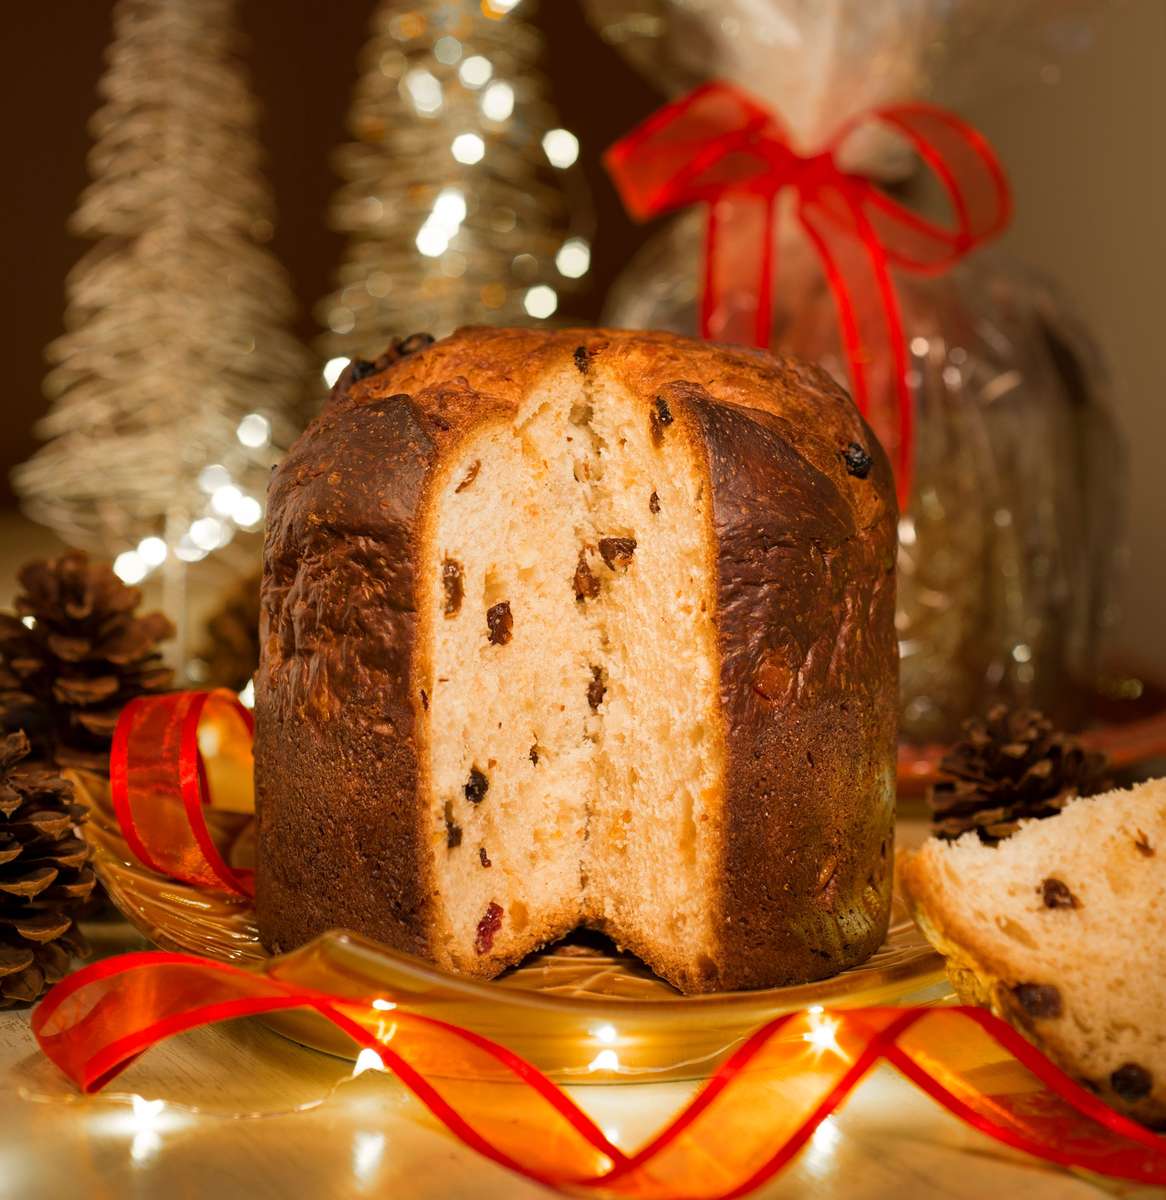 Christmas Panettone with a slice cut out of it to show candied orange and lemon peels and raisins, decorated with red ribbon and a holiday background